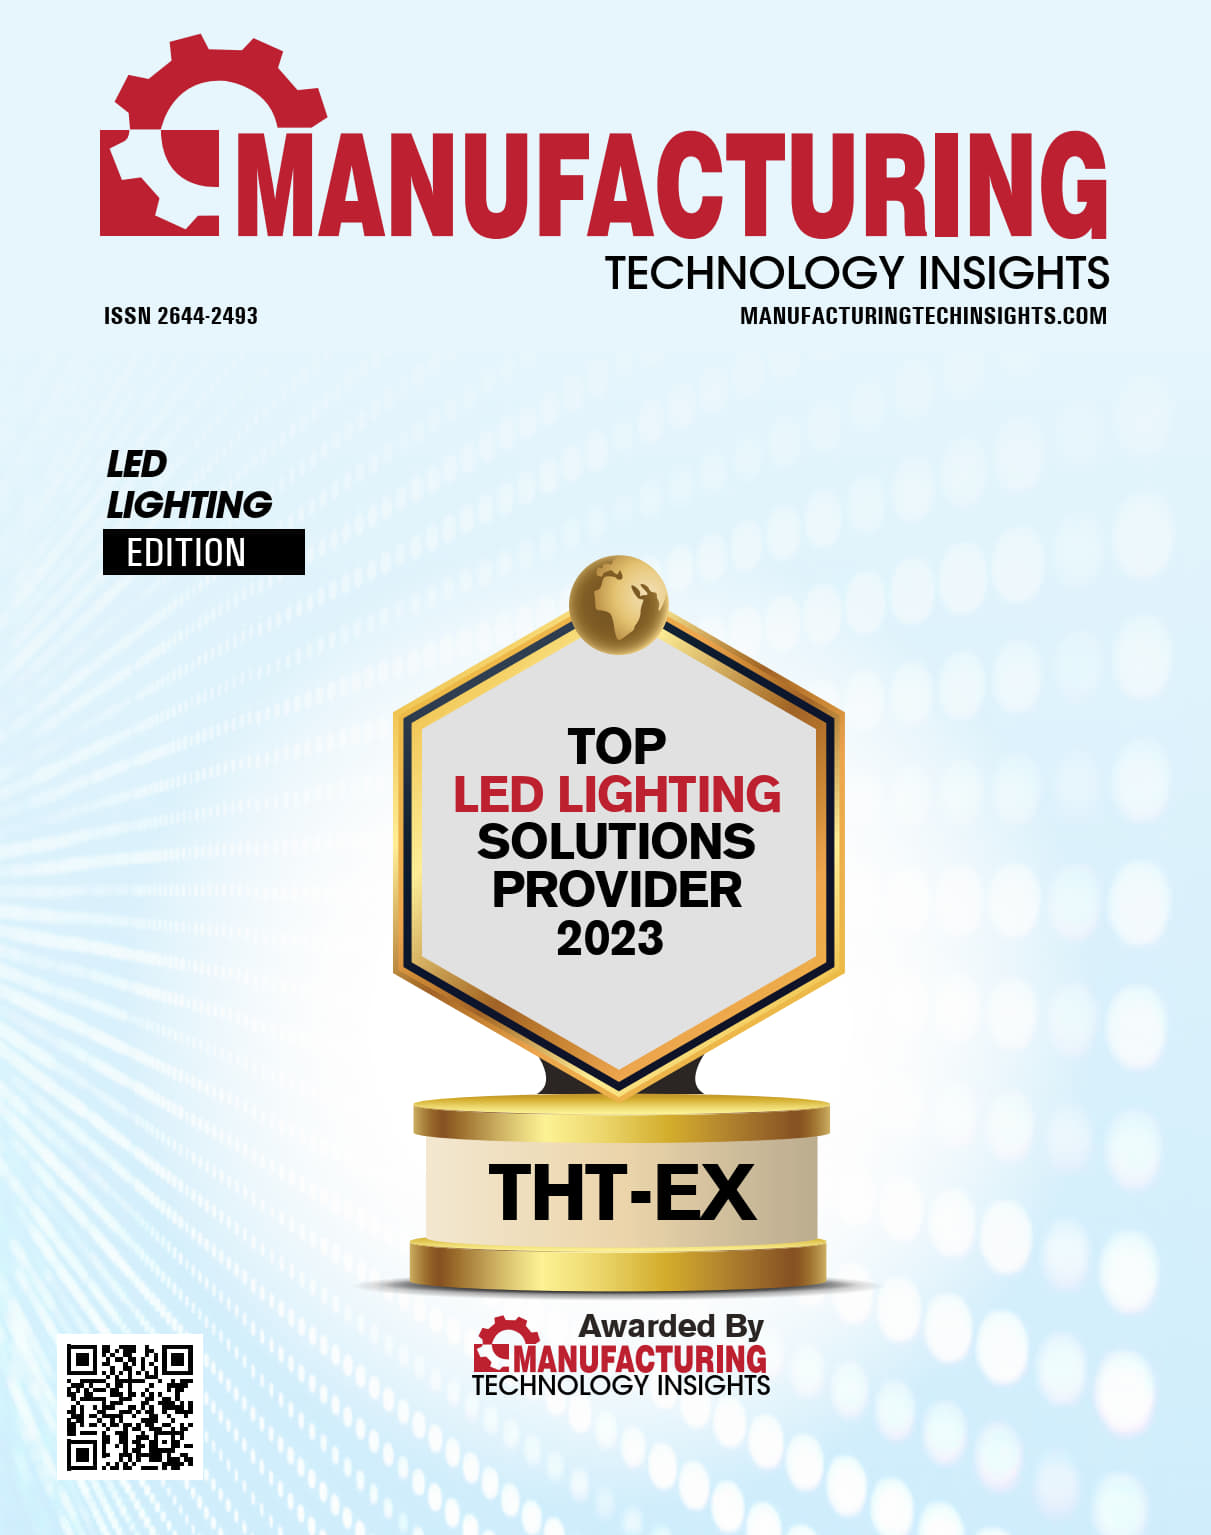 Thanks to Manufacturing Technology Insights for Awarding the 